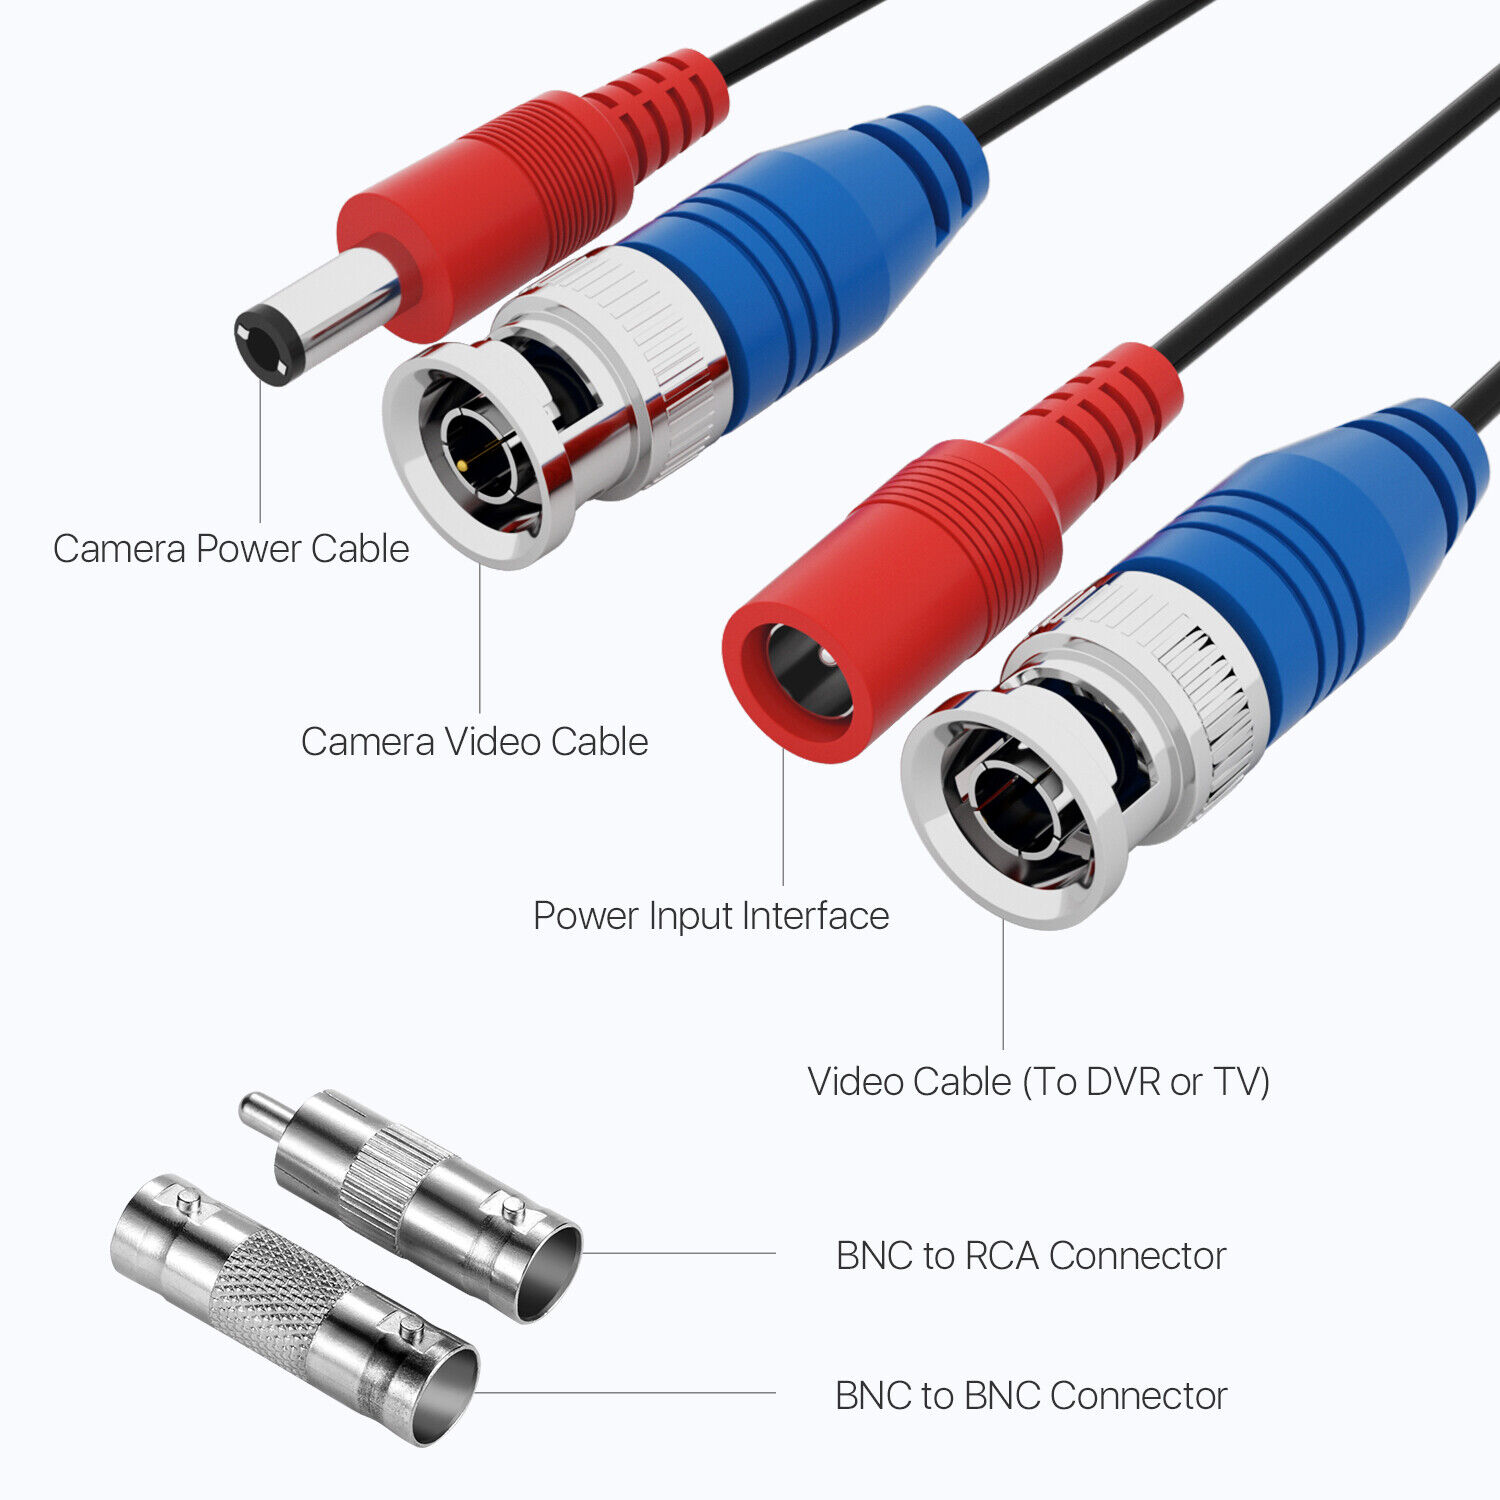 ZOSI 4 x60ft 18M Video BNC Power Cable RCA Cord Wire for Security Camera System ZOSI Does Not Apply - фотография #3